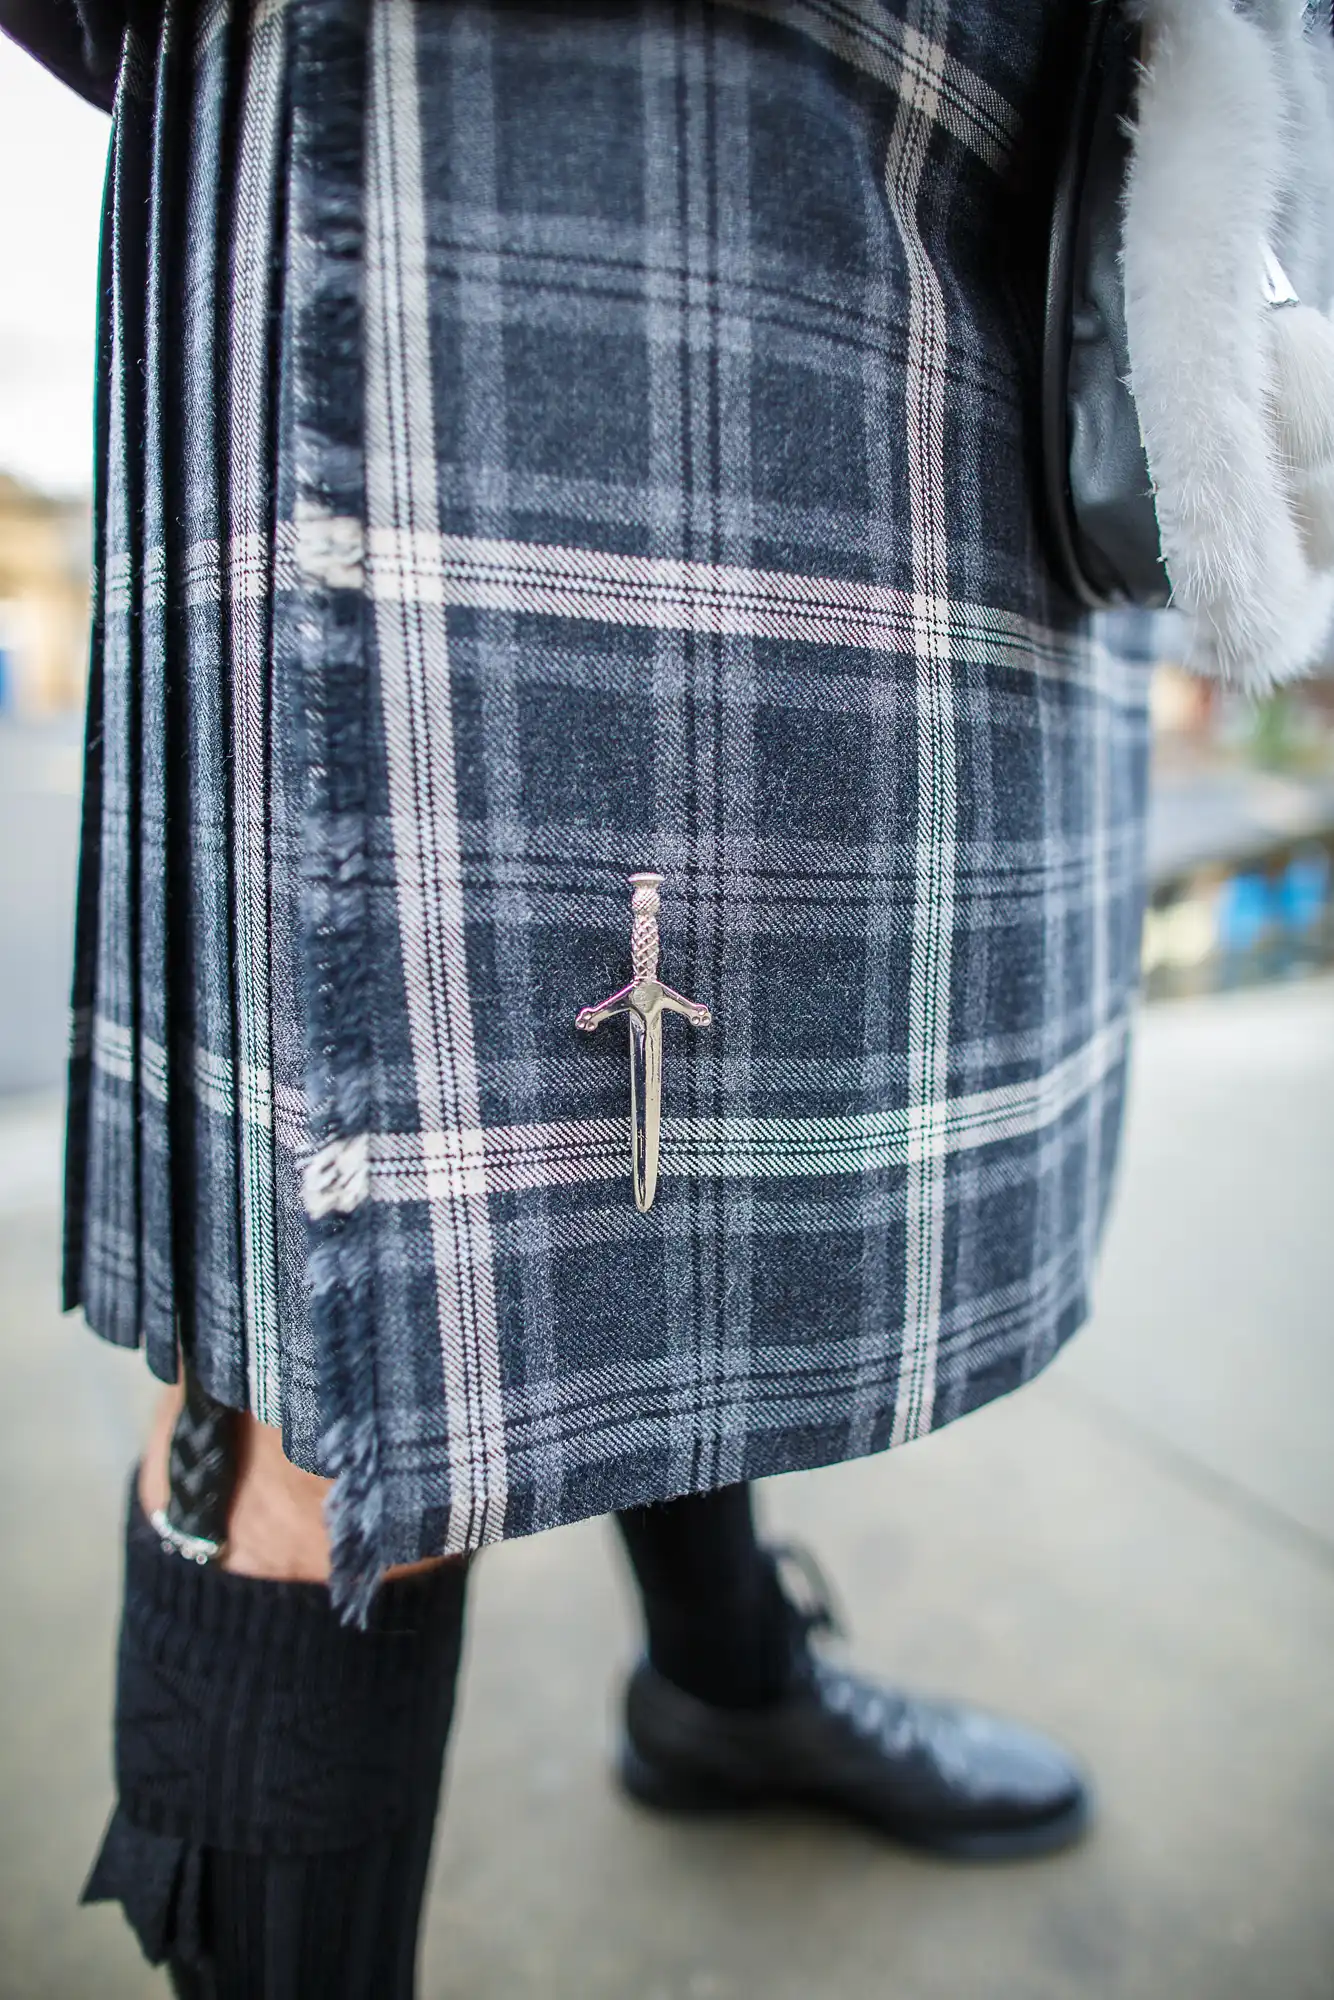 Close-up of a plaid skirt with a decorative sword-shaped kilt pin on it, complemented by black tights and shoes.